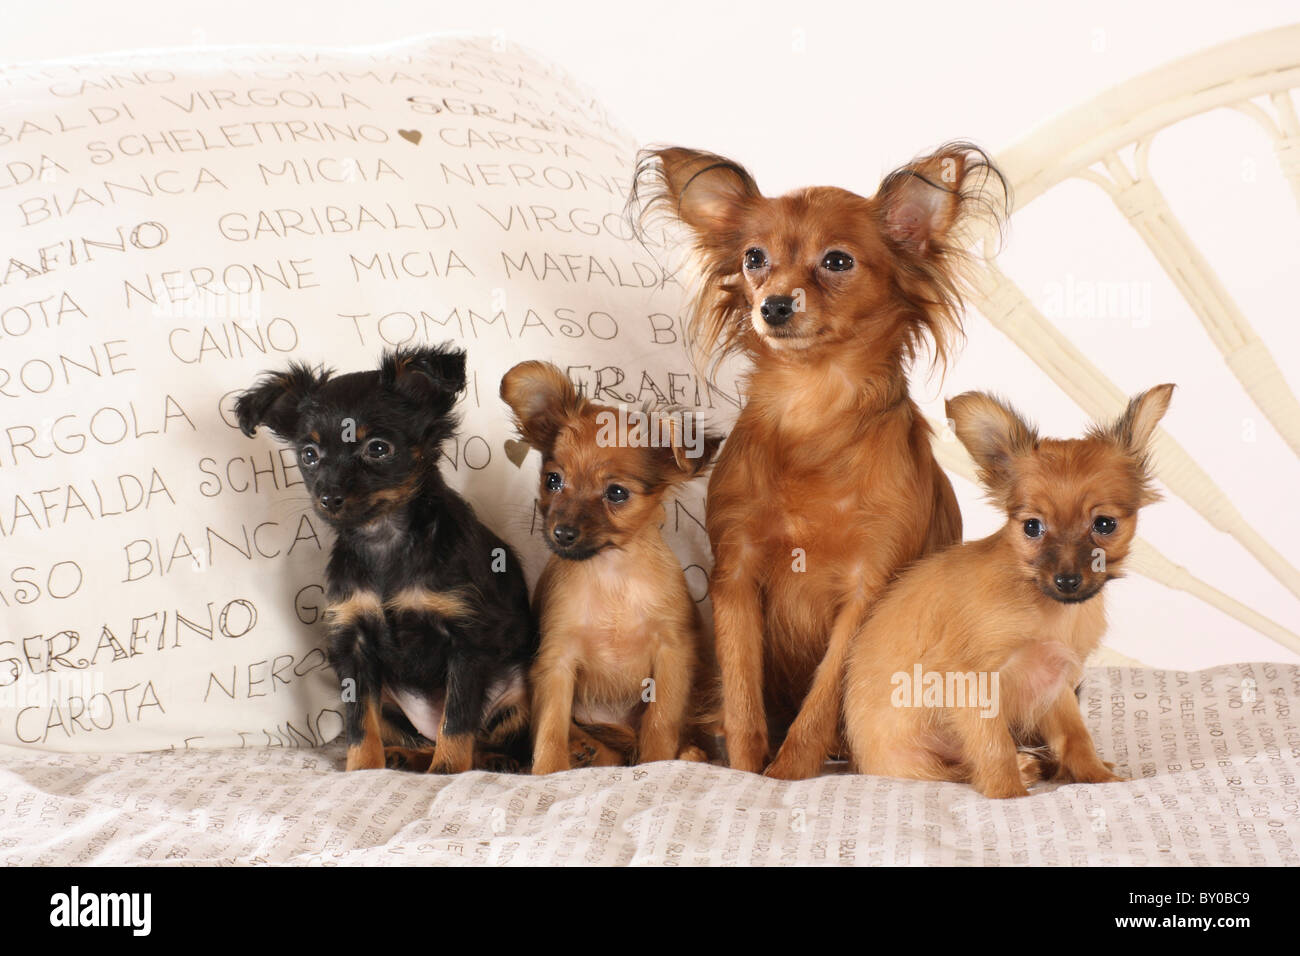 Russian Toy Terrier dog with three puppies - sitting on a bed Stock Photo